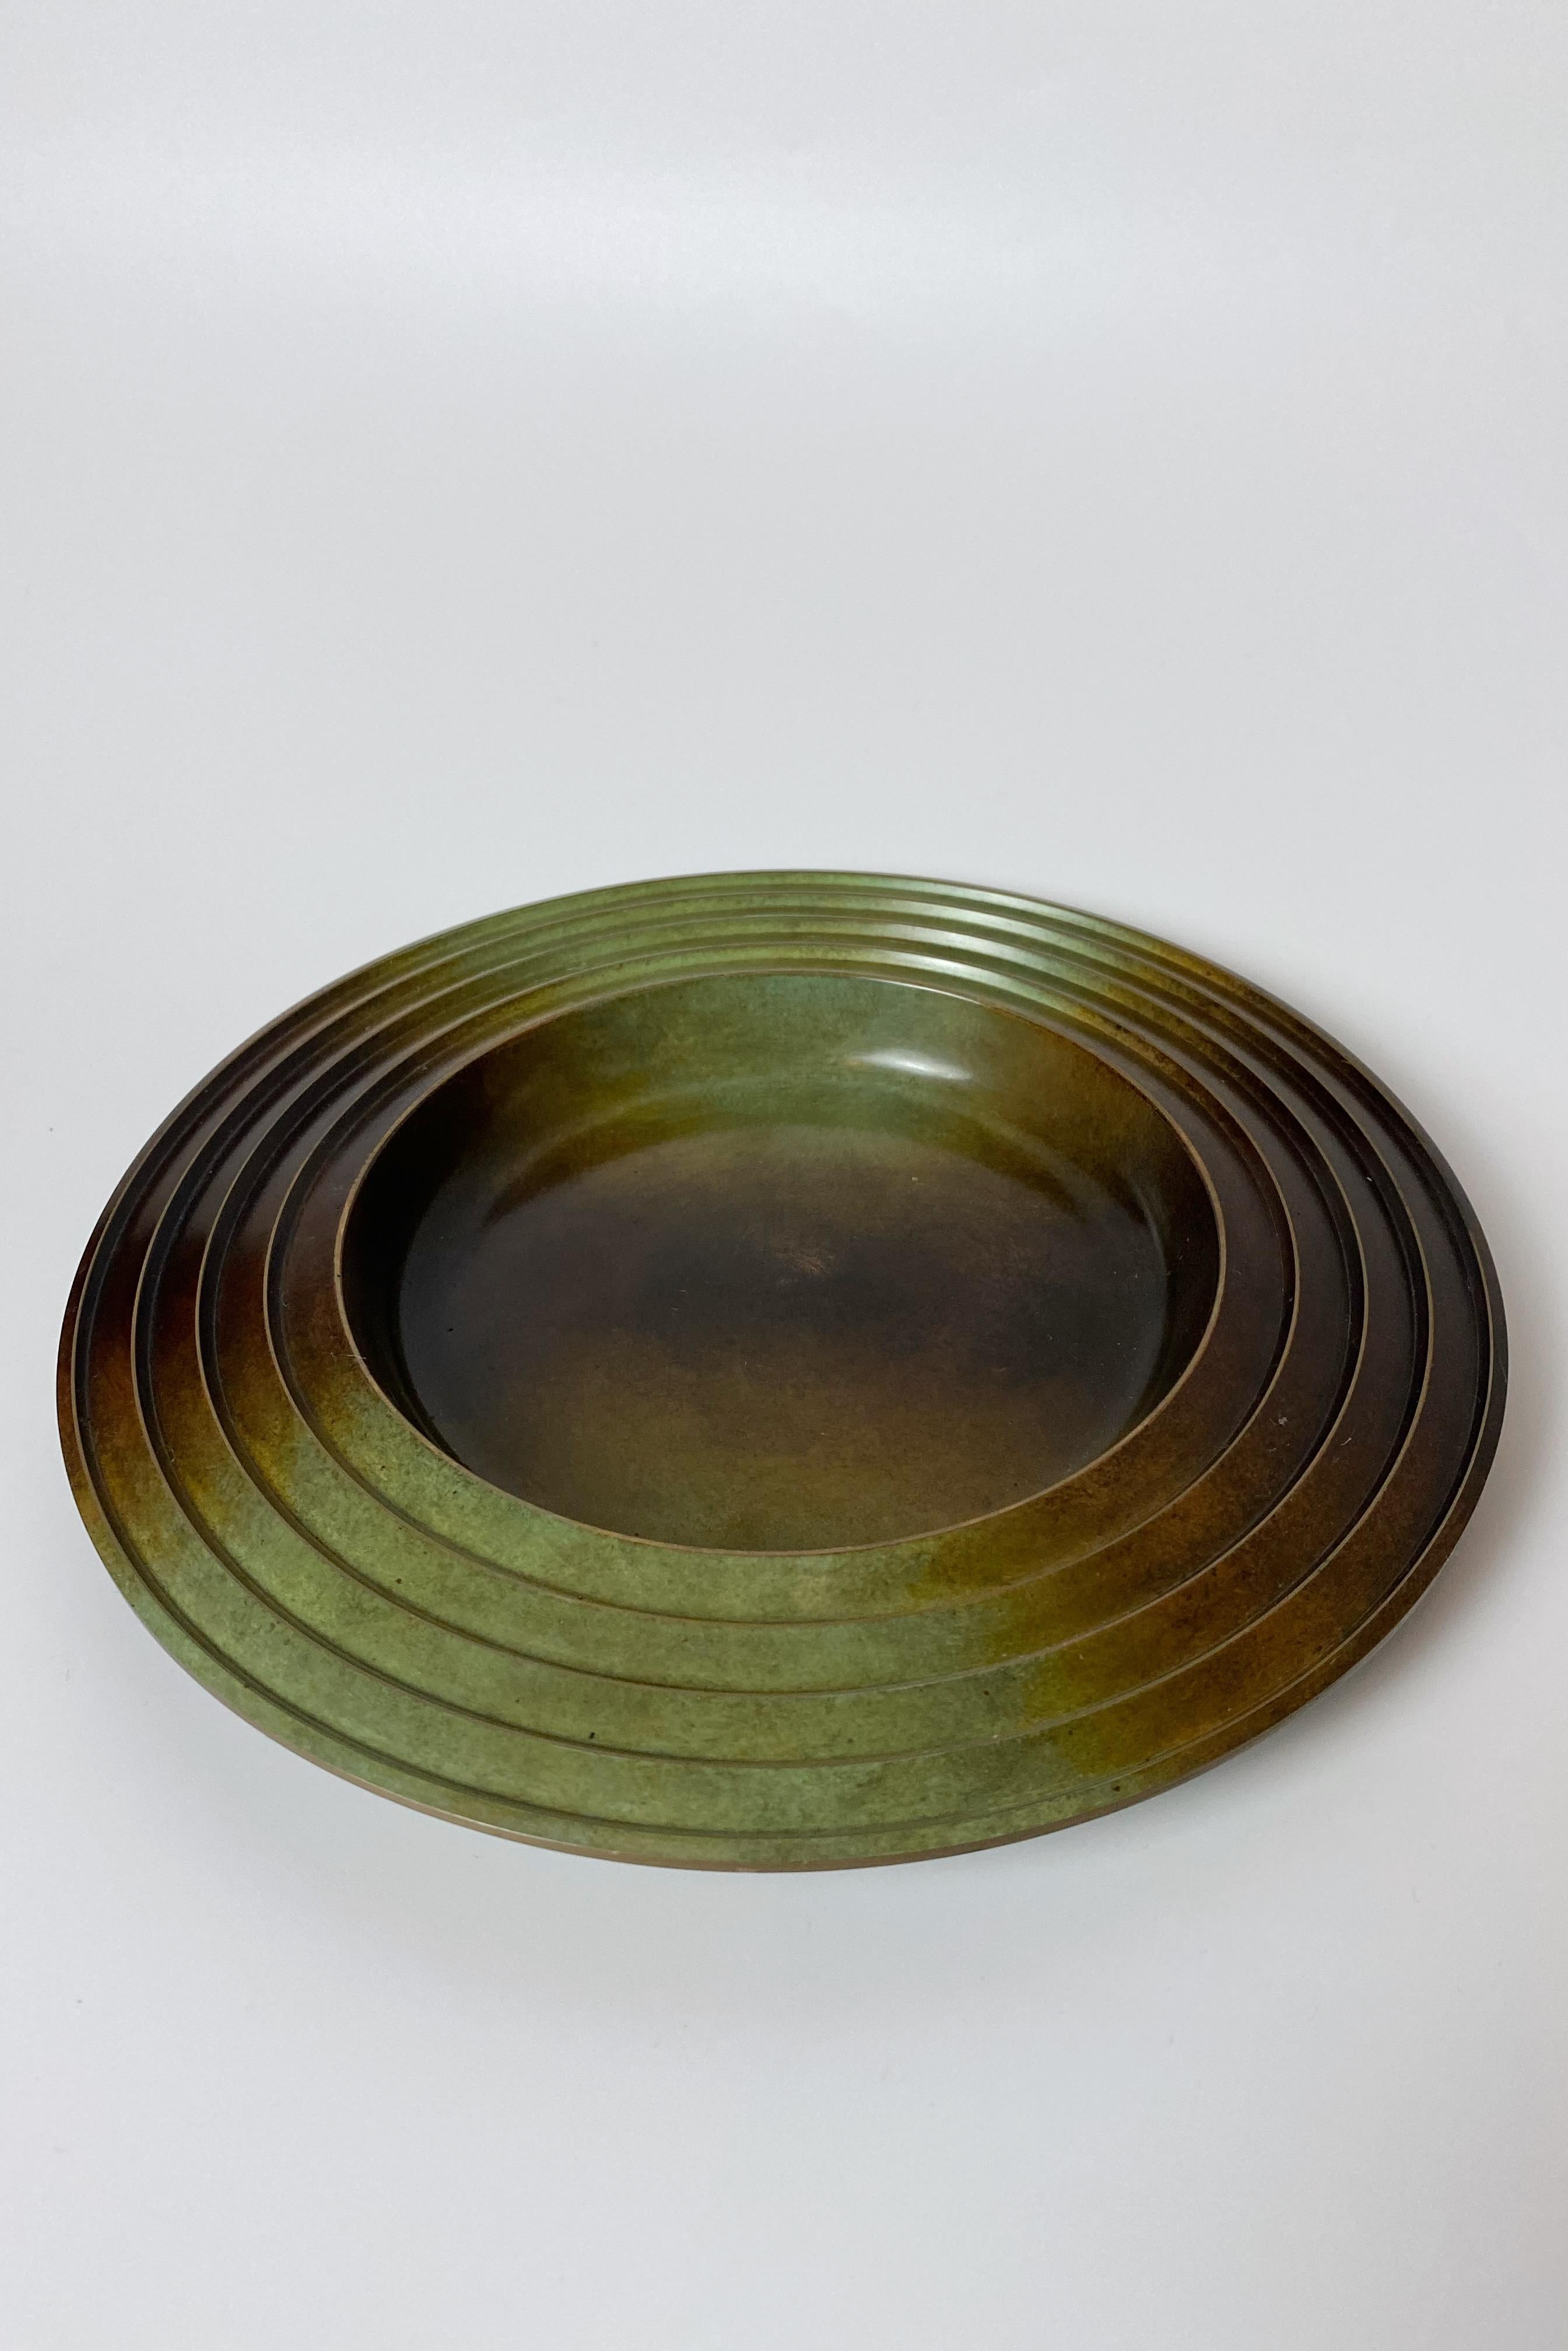 Scandinavian Modern 1930s Bronze Plate and Vase by Ystad Brons For Sale